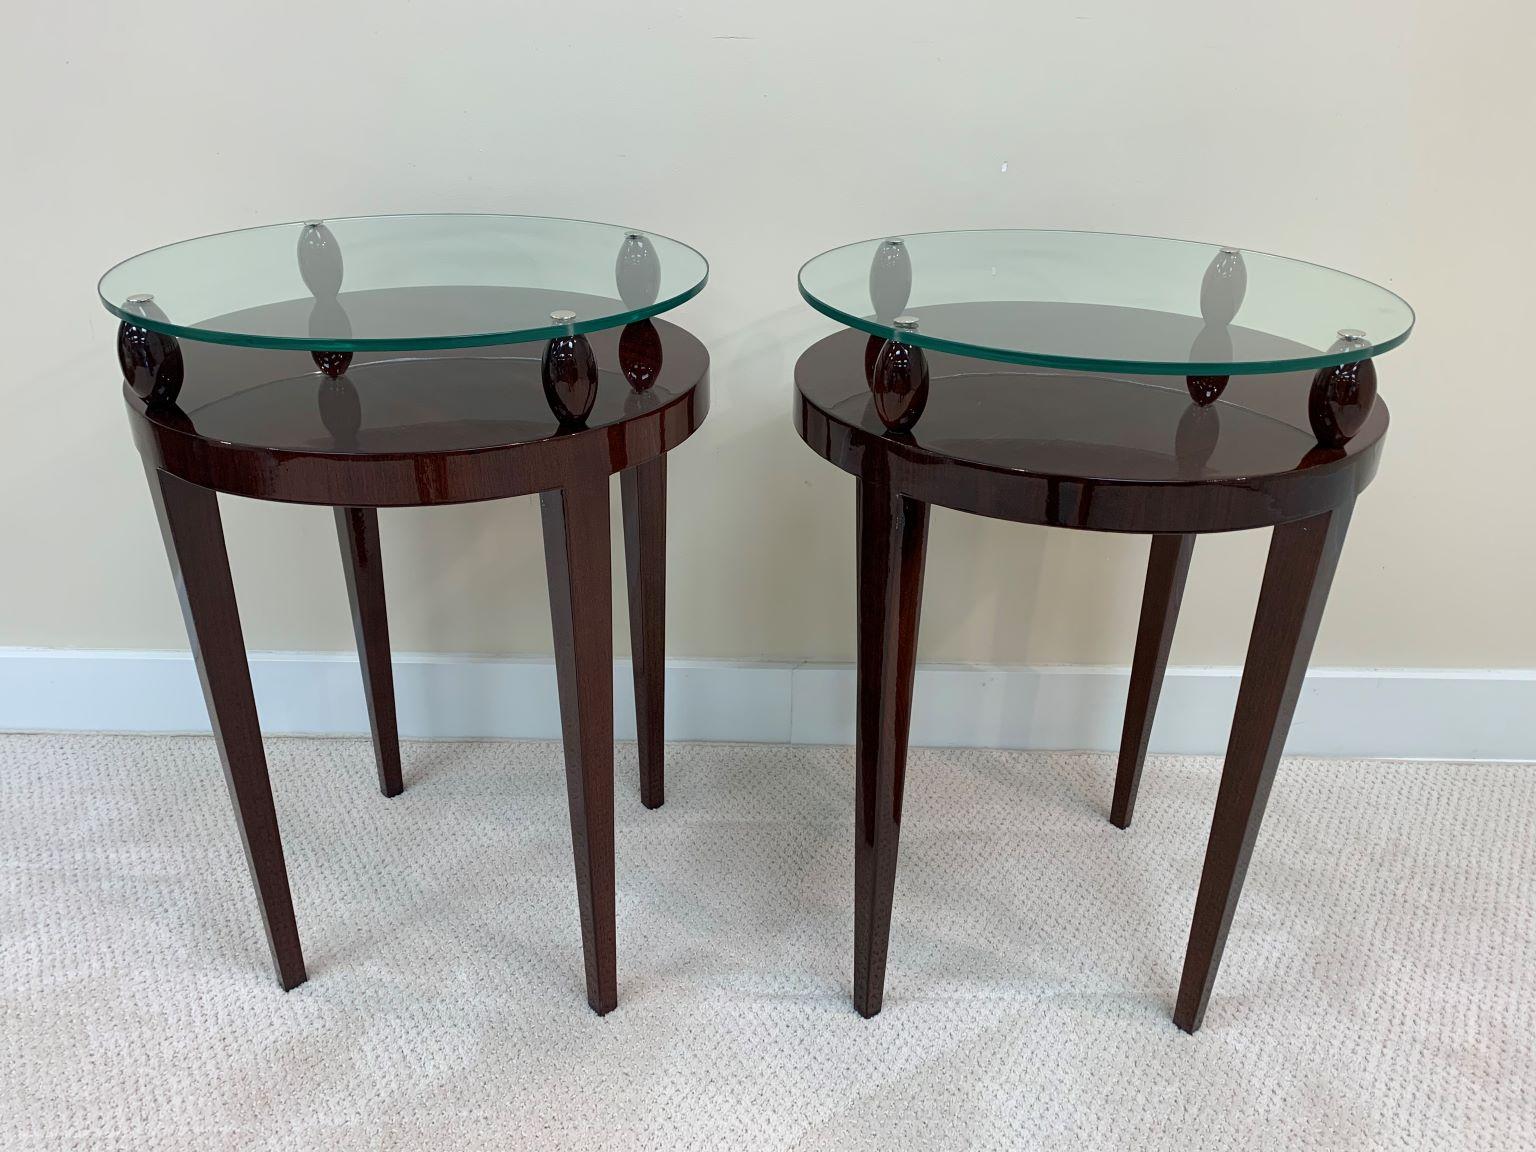 Stunning Pair of Round  Art Deco Glass-Top Side Tables In Walnut Circa 1940's In Excellent Condition For Sale In Bernville, PA